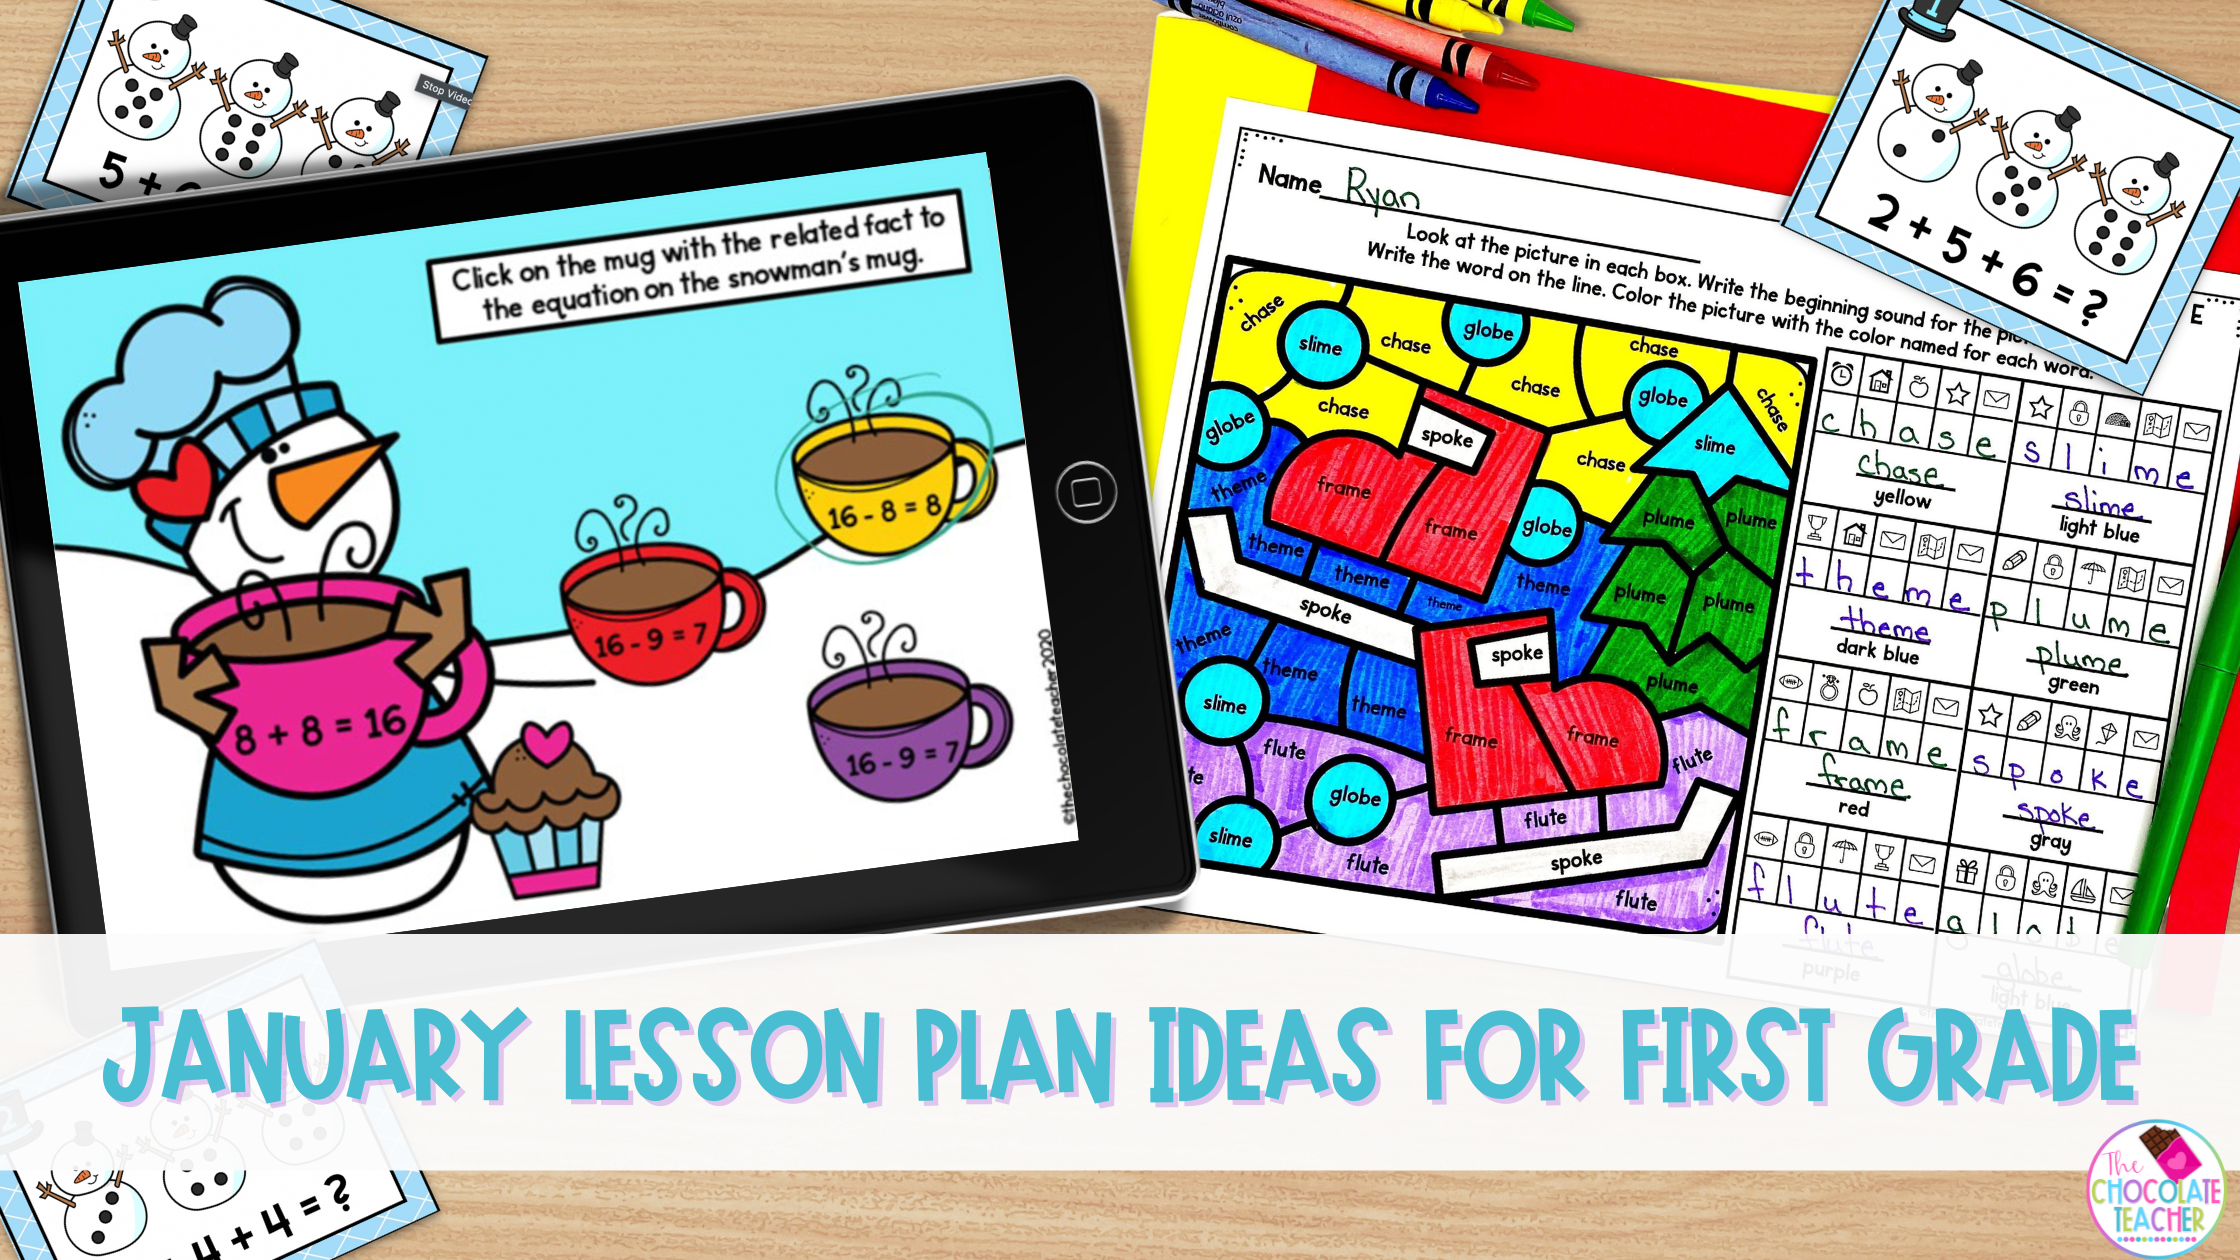 Use these January lesson plan ideas for first grade for fun and exciting lessons covering key math and ELA concepts you have been studying so far this year.